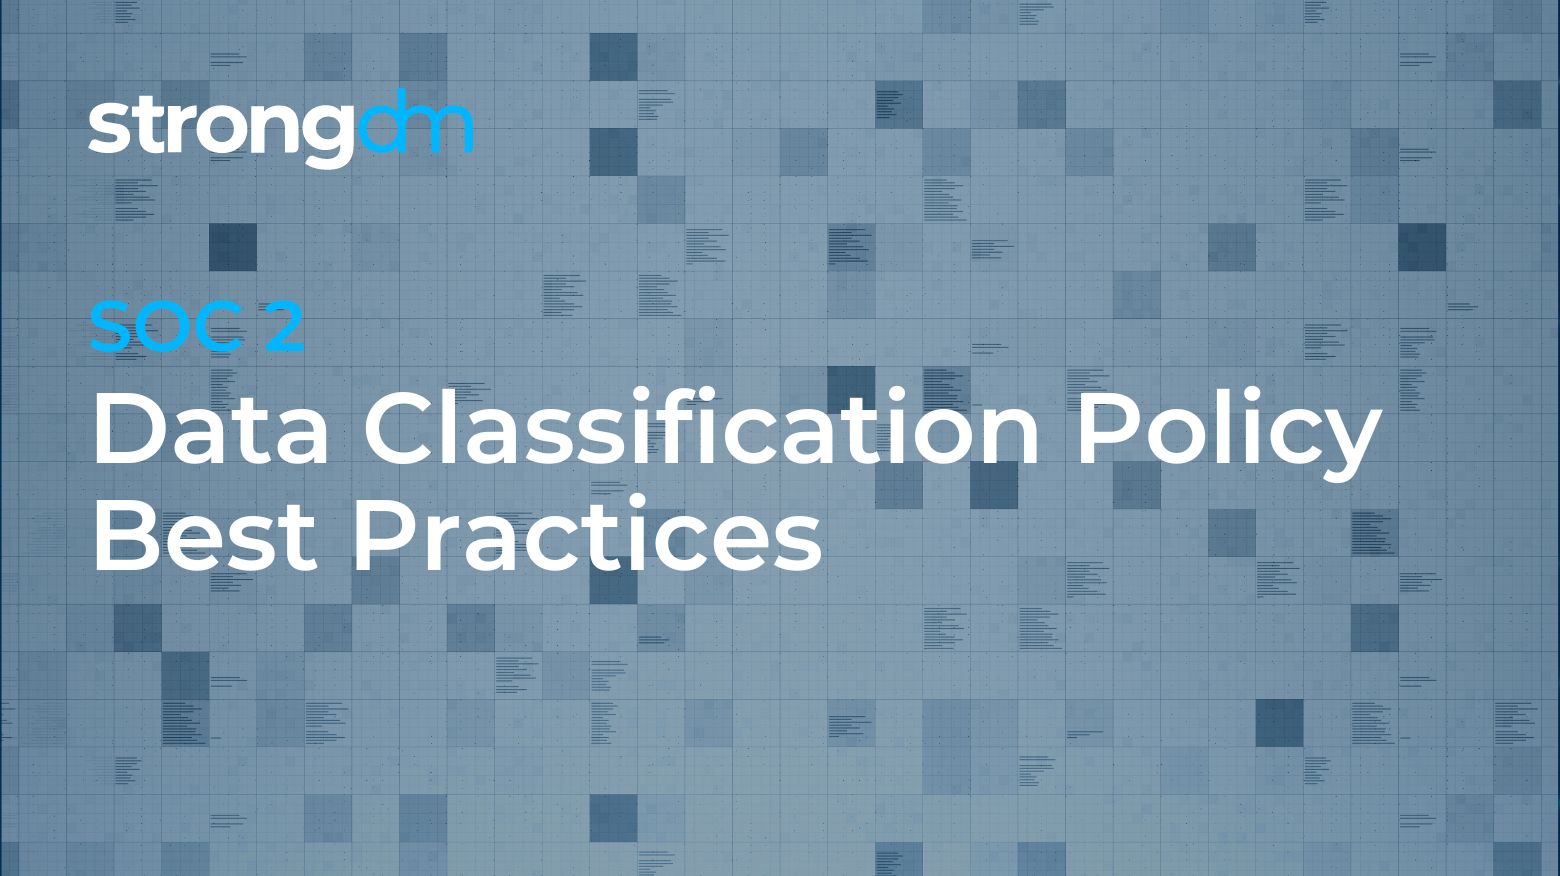 Data Classification Policy Best Practices